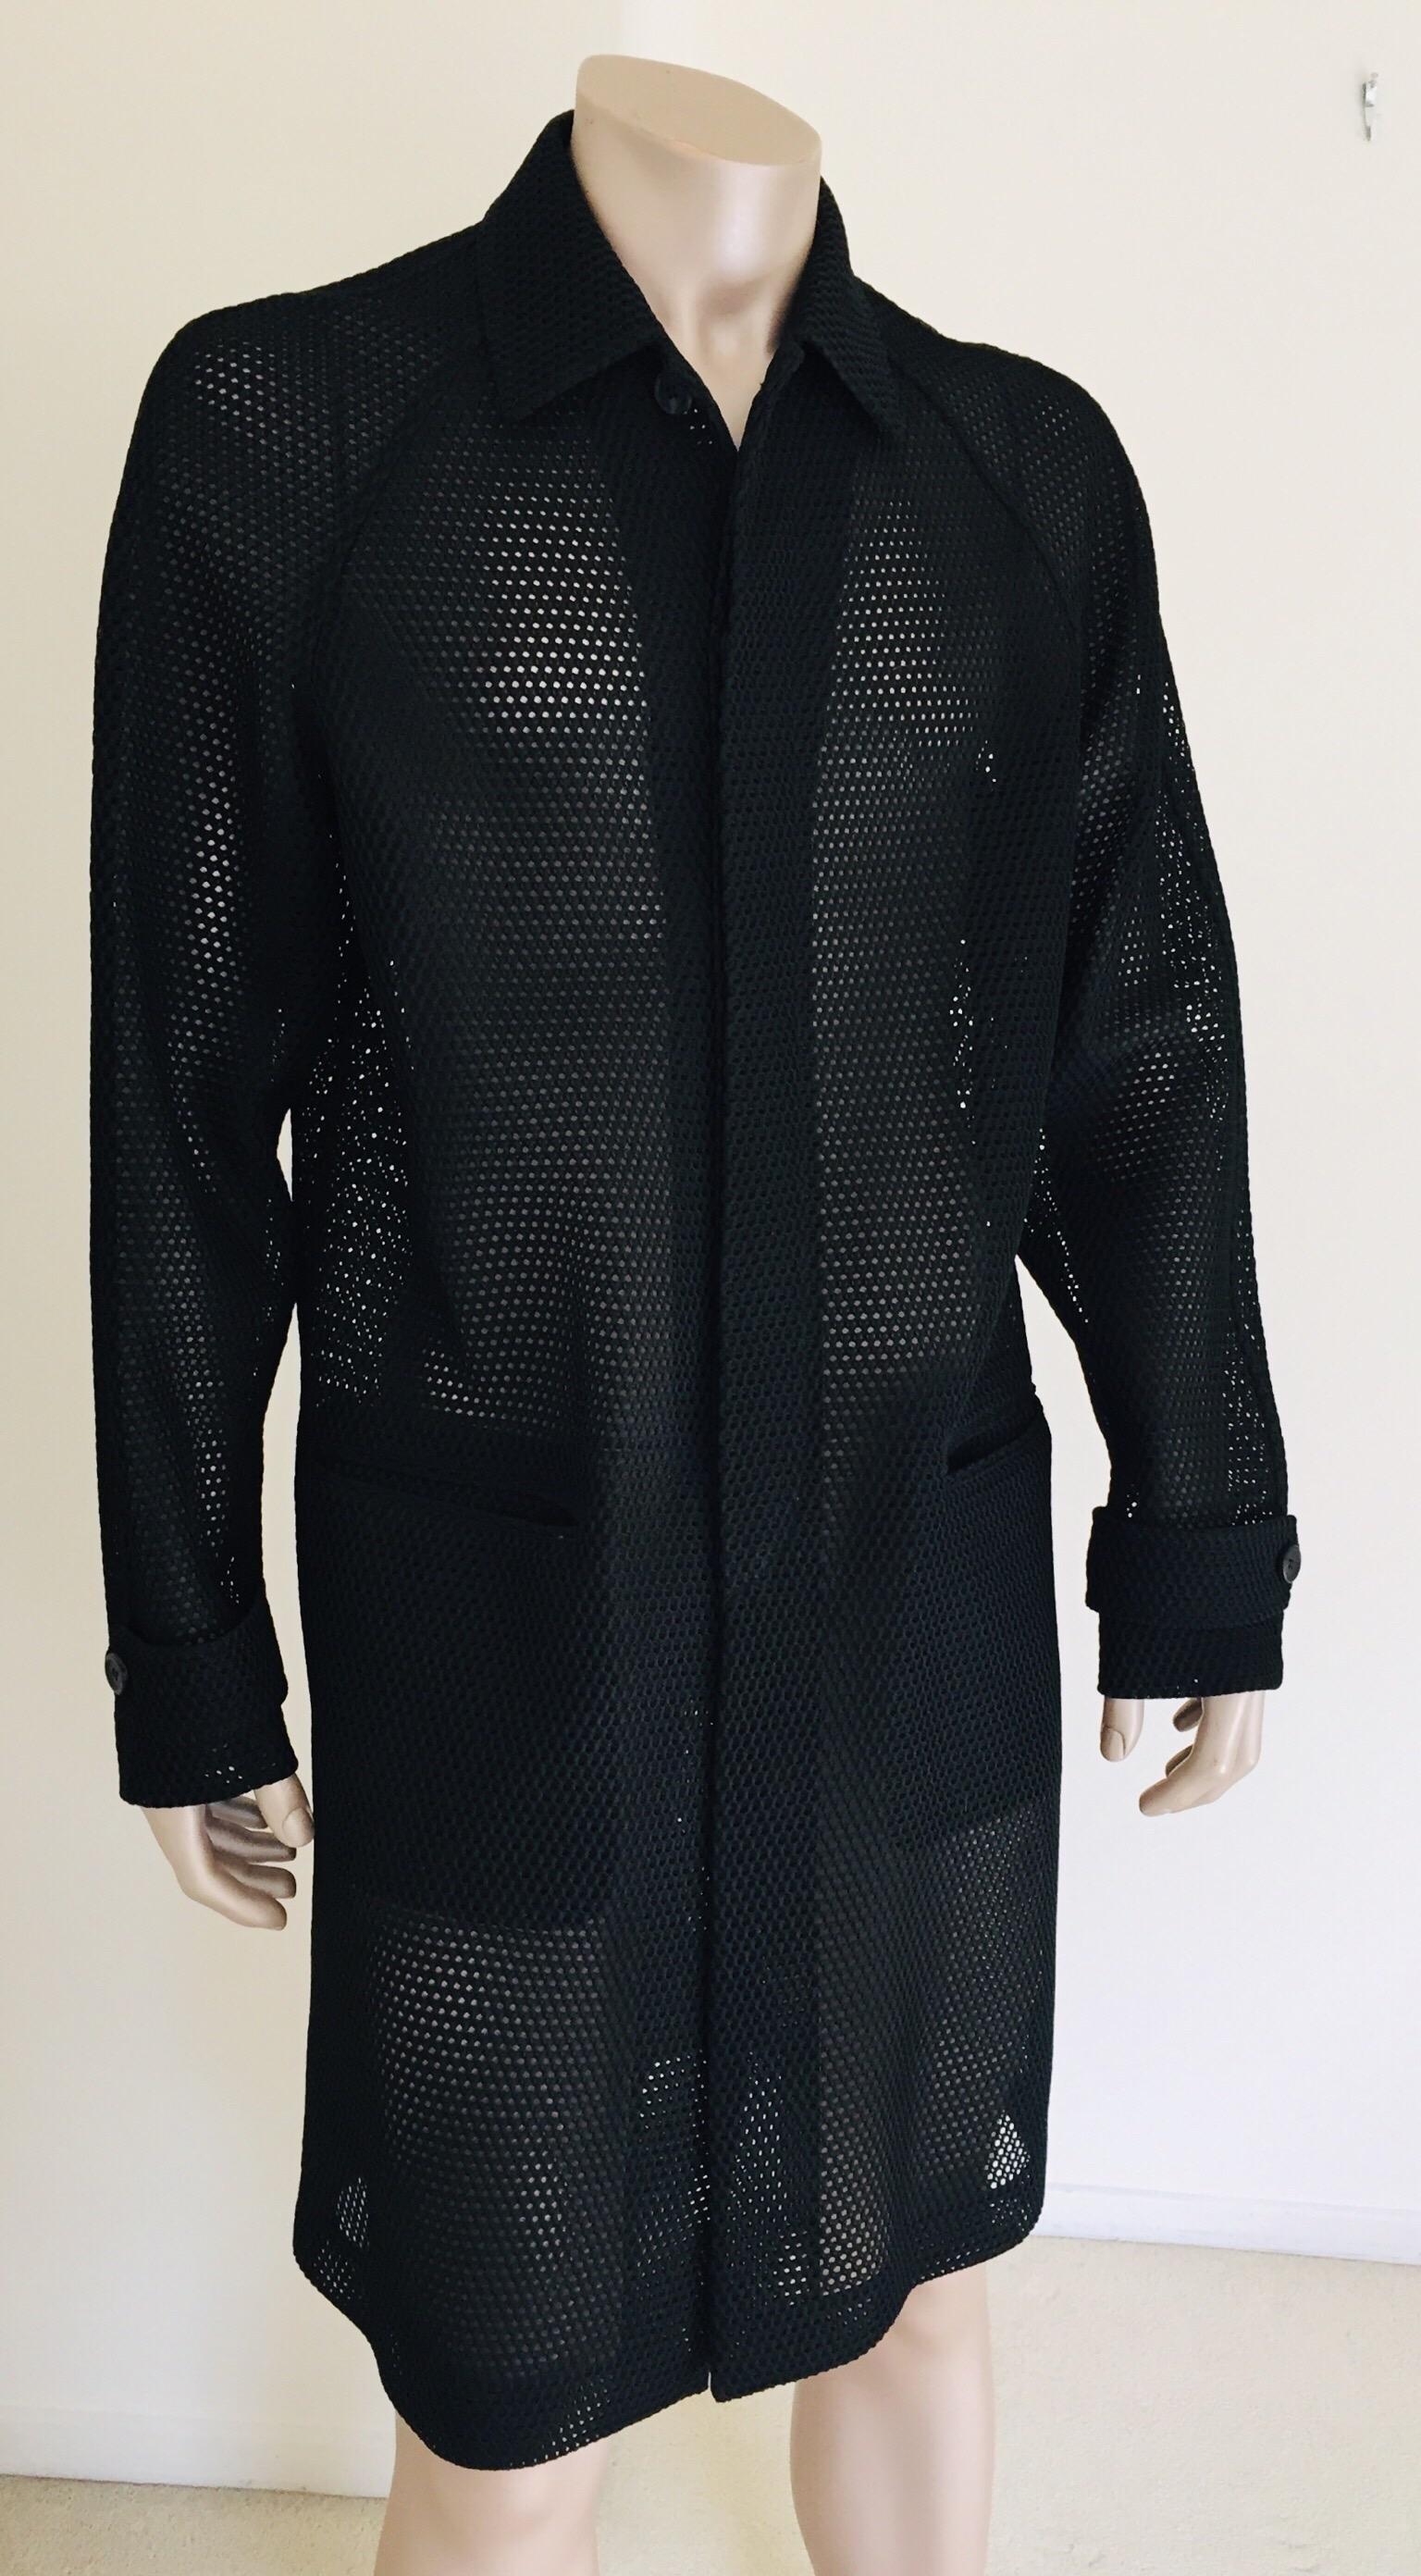 Prada Black Overcoat Made in Italy In Excellent Condition For Sale In North Hollywood, CA